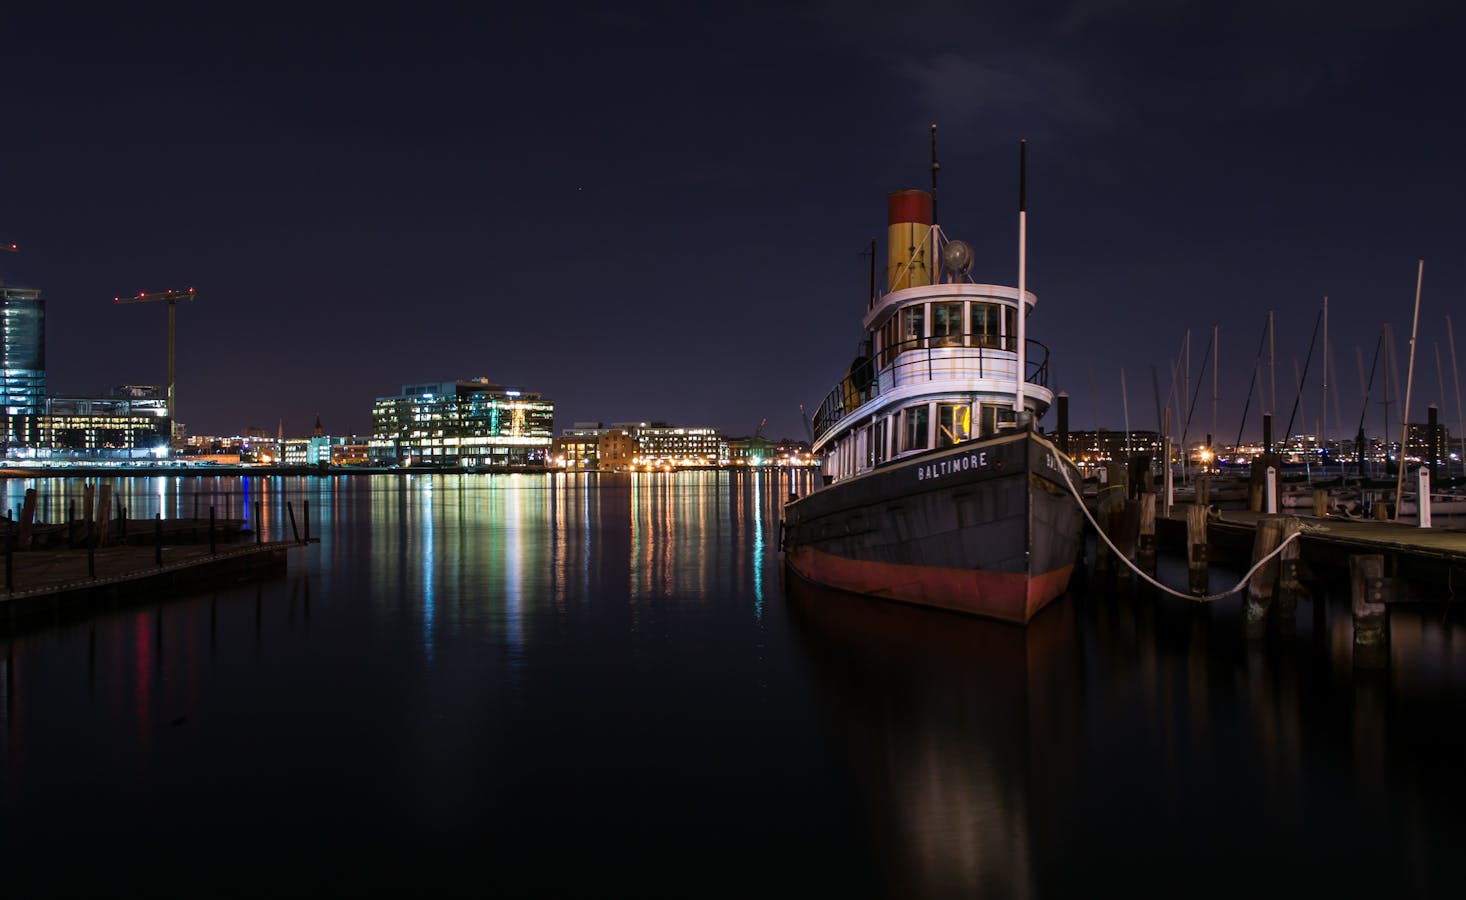 Boat in the harbor, Baltimore, Maryland